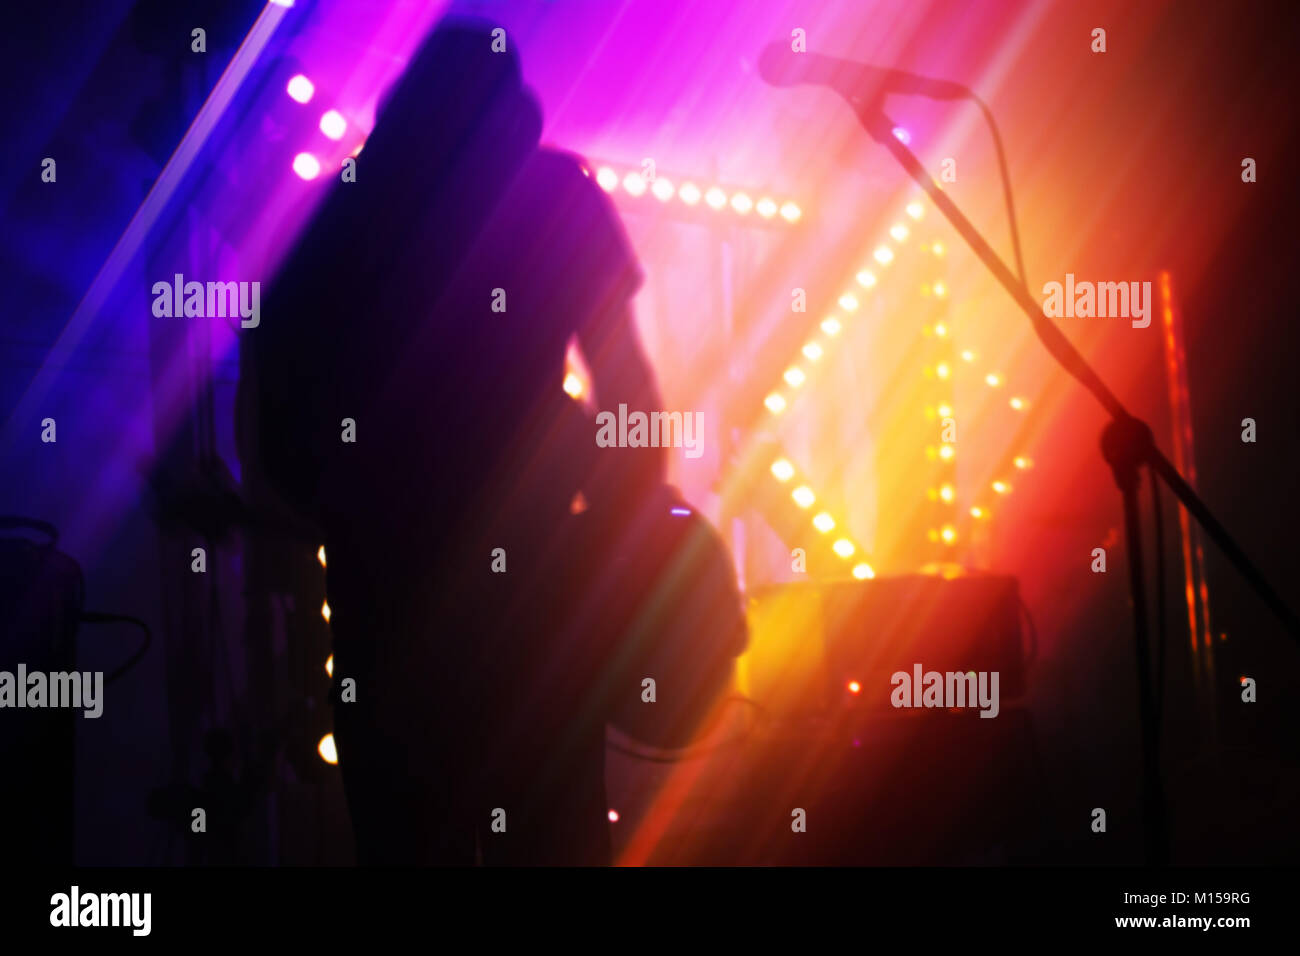 Bright colorful blurred rock music abstract background, bass guitar player on a stage Stock Photo